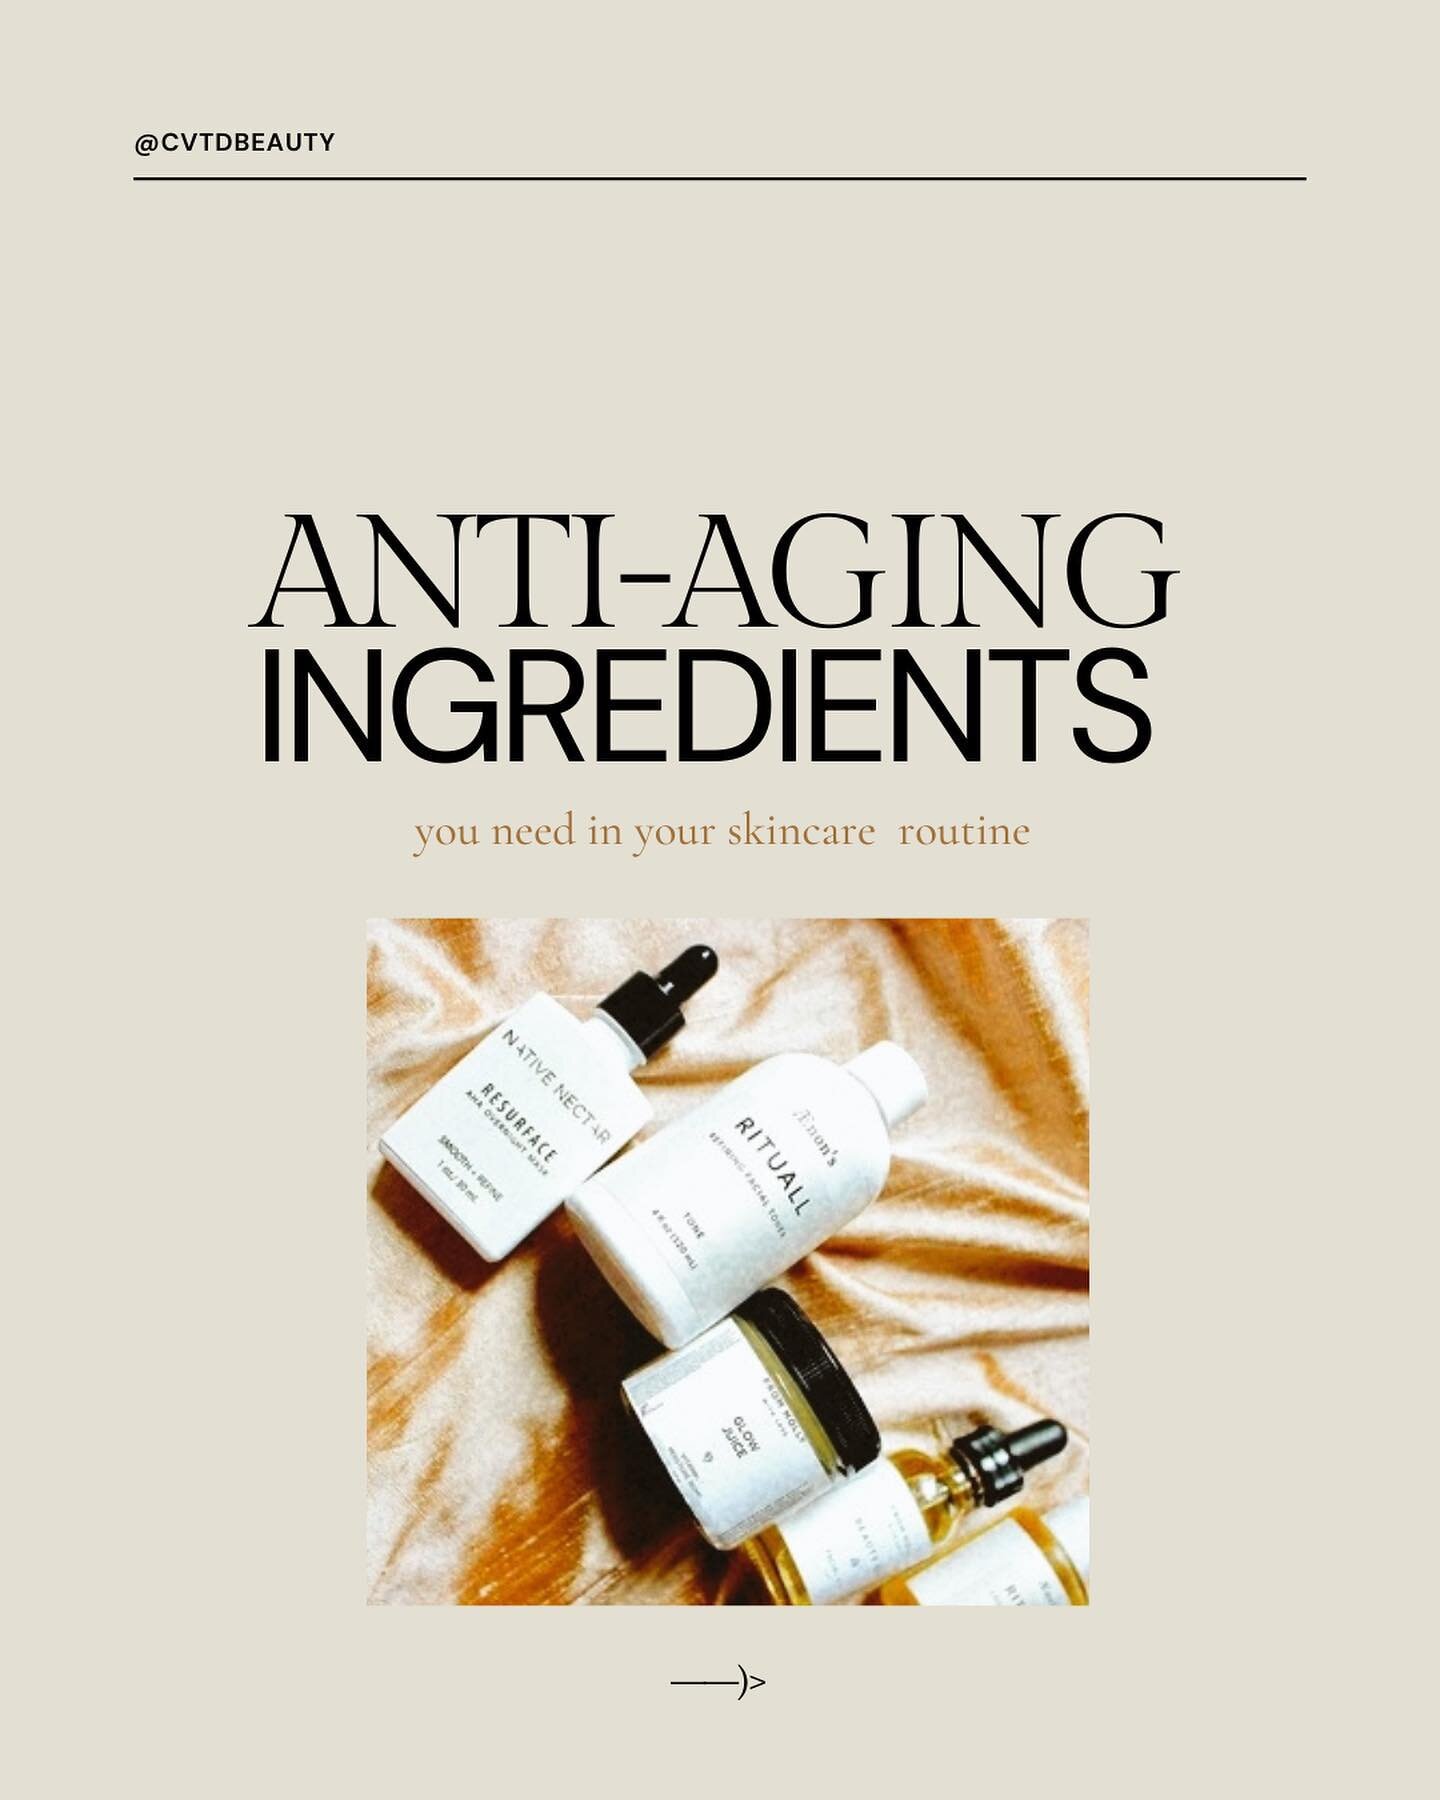 Highlighting some of our fave #antiaging skincare ingredients - antioxidants, AHAs &amp; co-enzyme Q10. ⠀
.⠀
If you&rsquo;re focused on managing the signs of aging, what ingredients do you look for?⠀
.⠀
What ingredients do you want to know more about